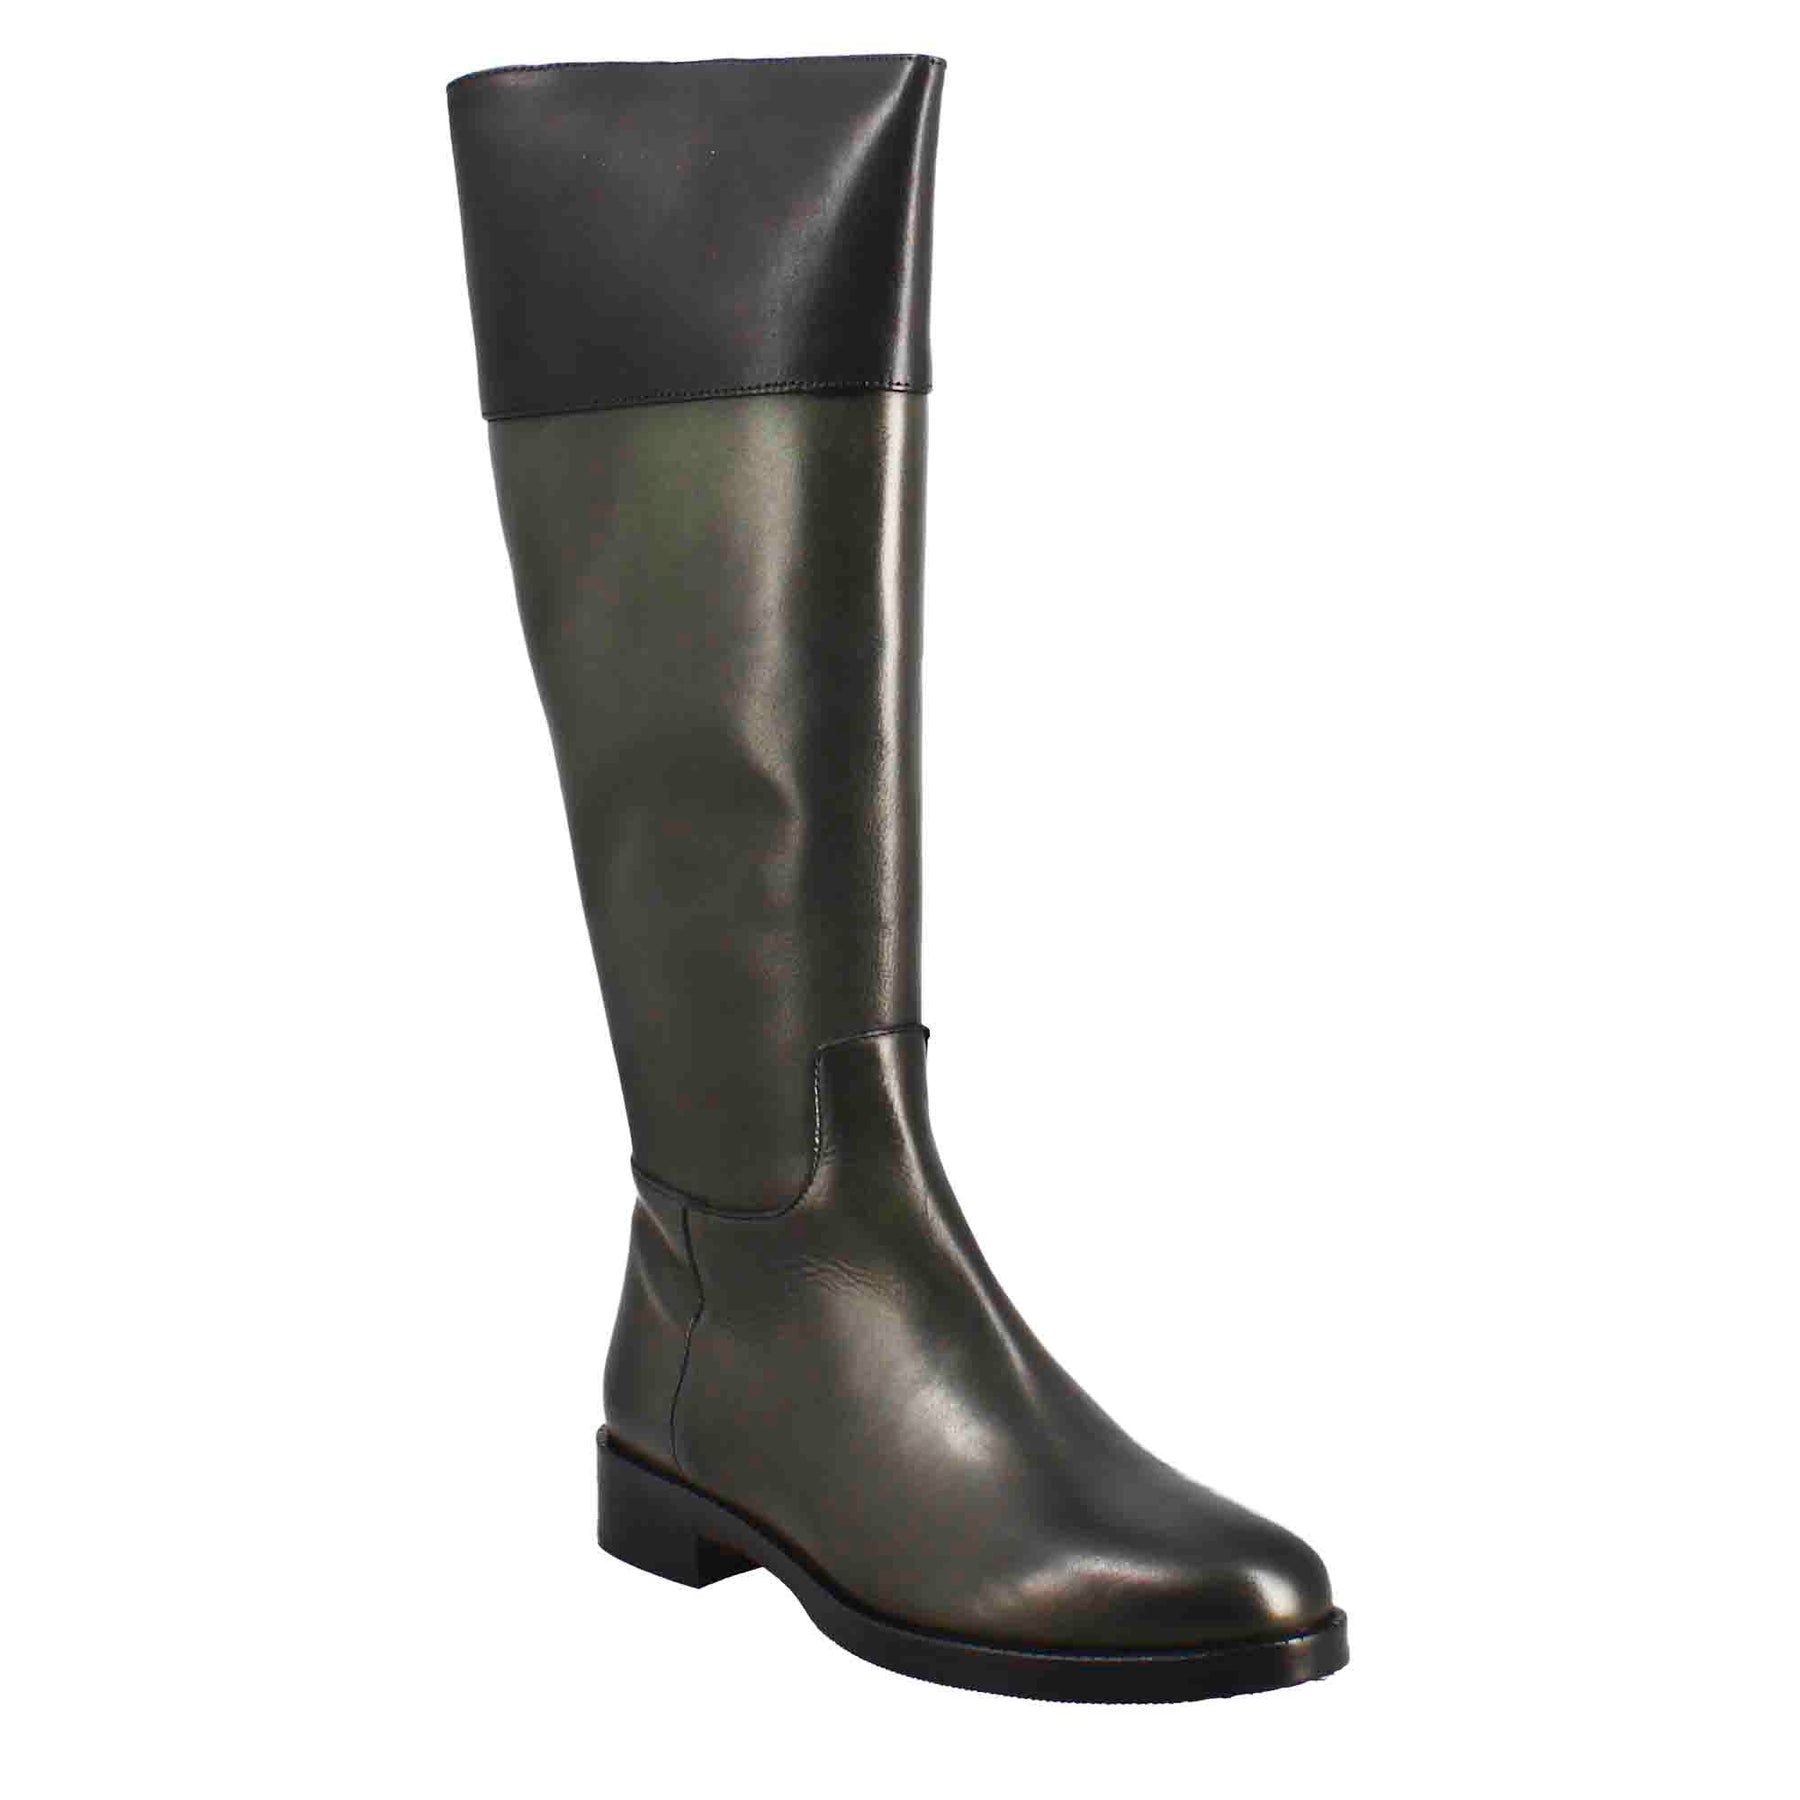 Smooth women's knee-high boot with low heel in green and black leather